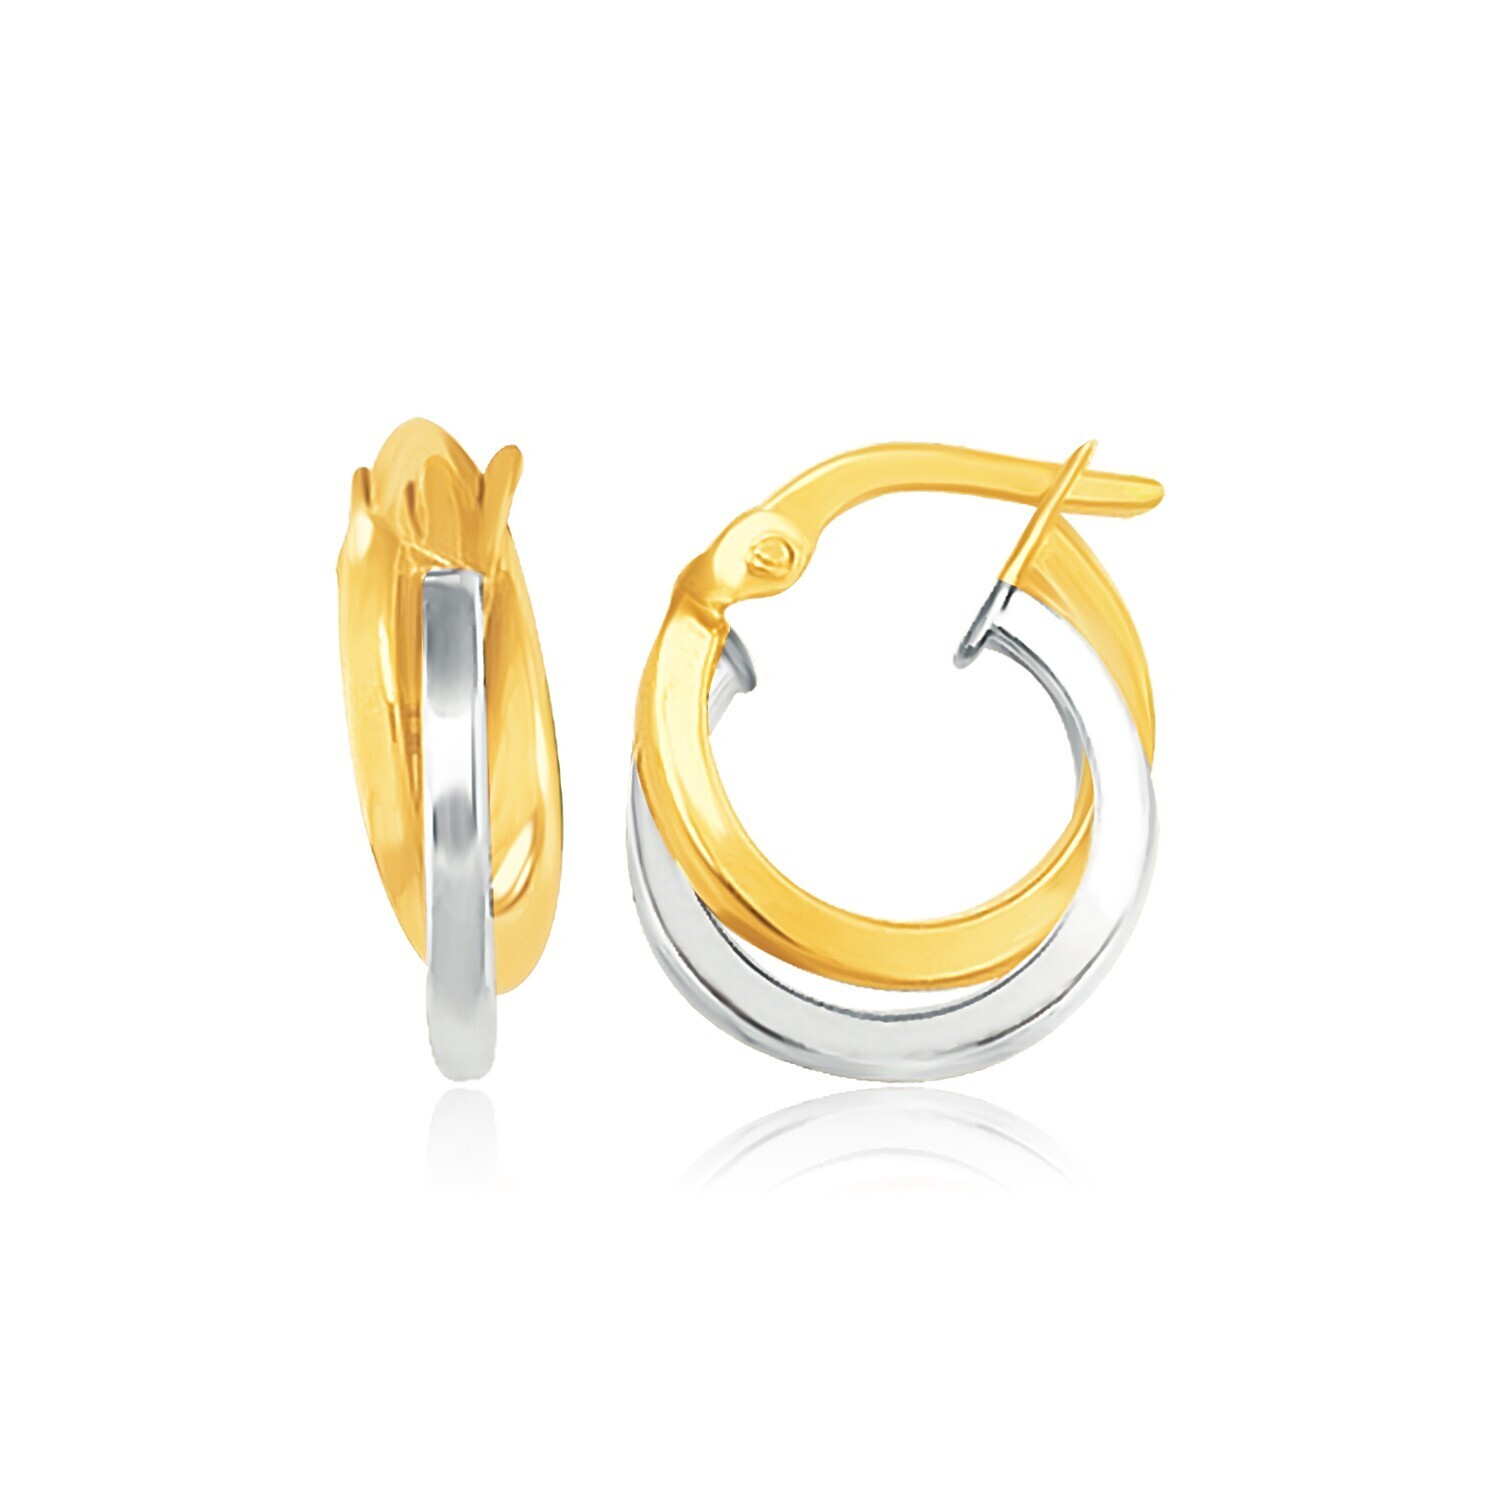 14k Two Tone Gold Earrings in Double Round Hoop Style